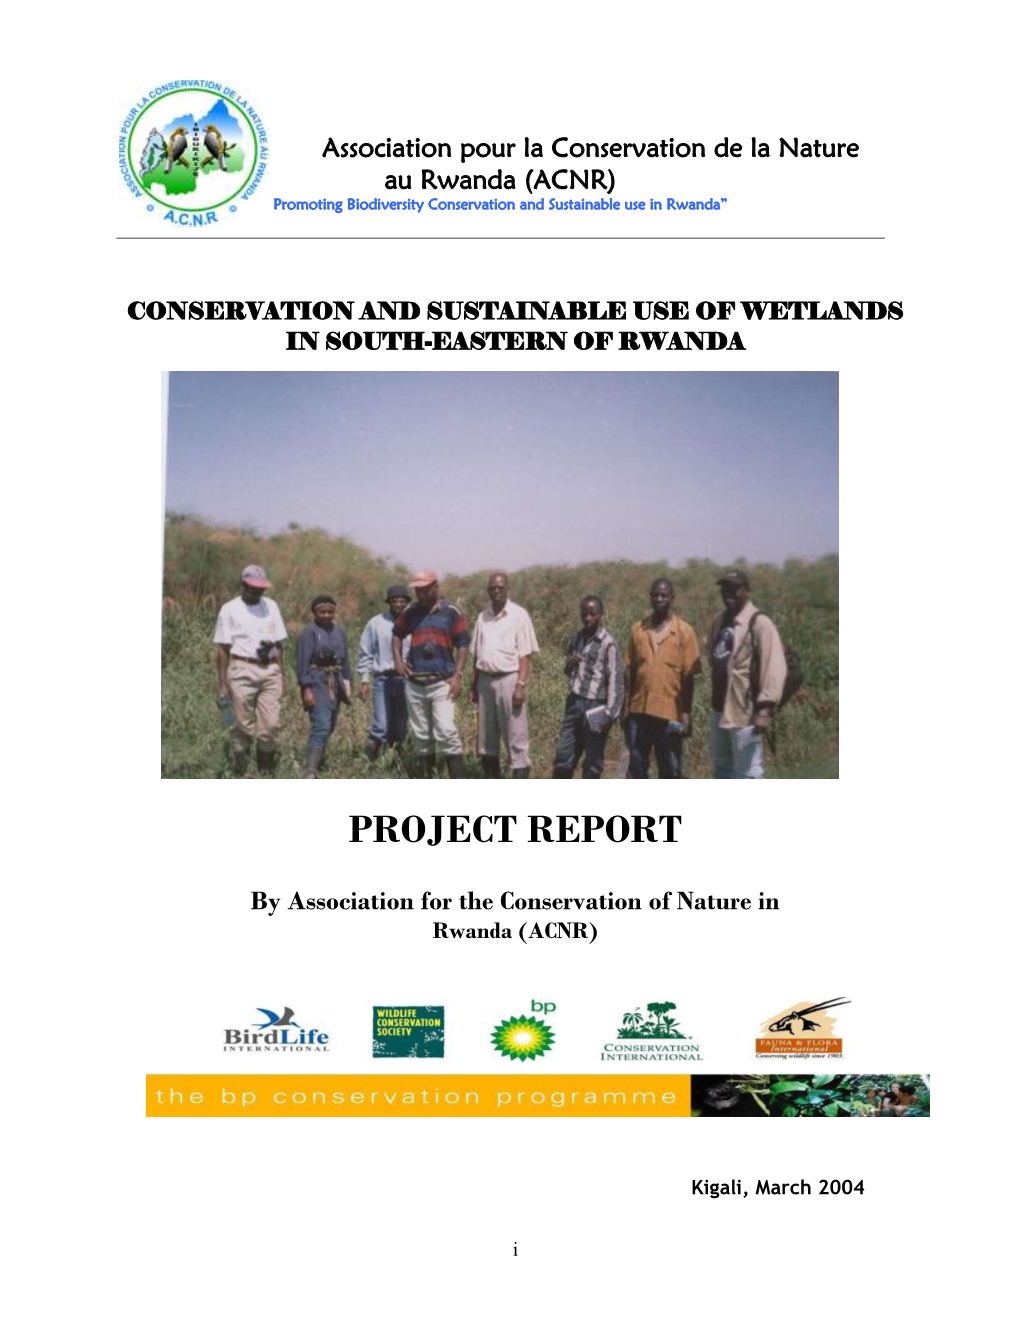 Conservation and Sustainable Use of Wetlands in South-Eastern of Rwanda